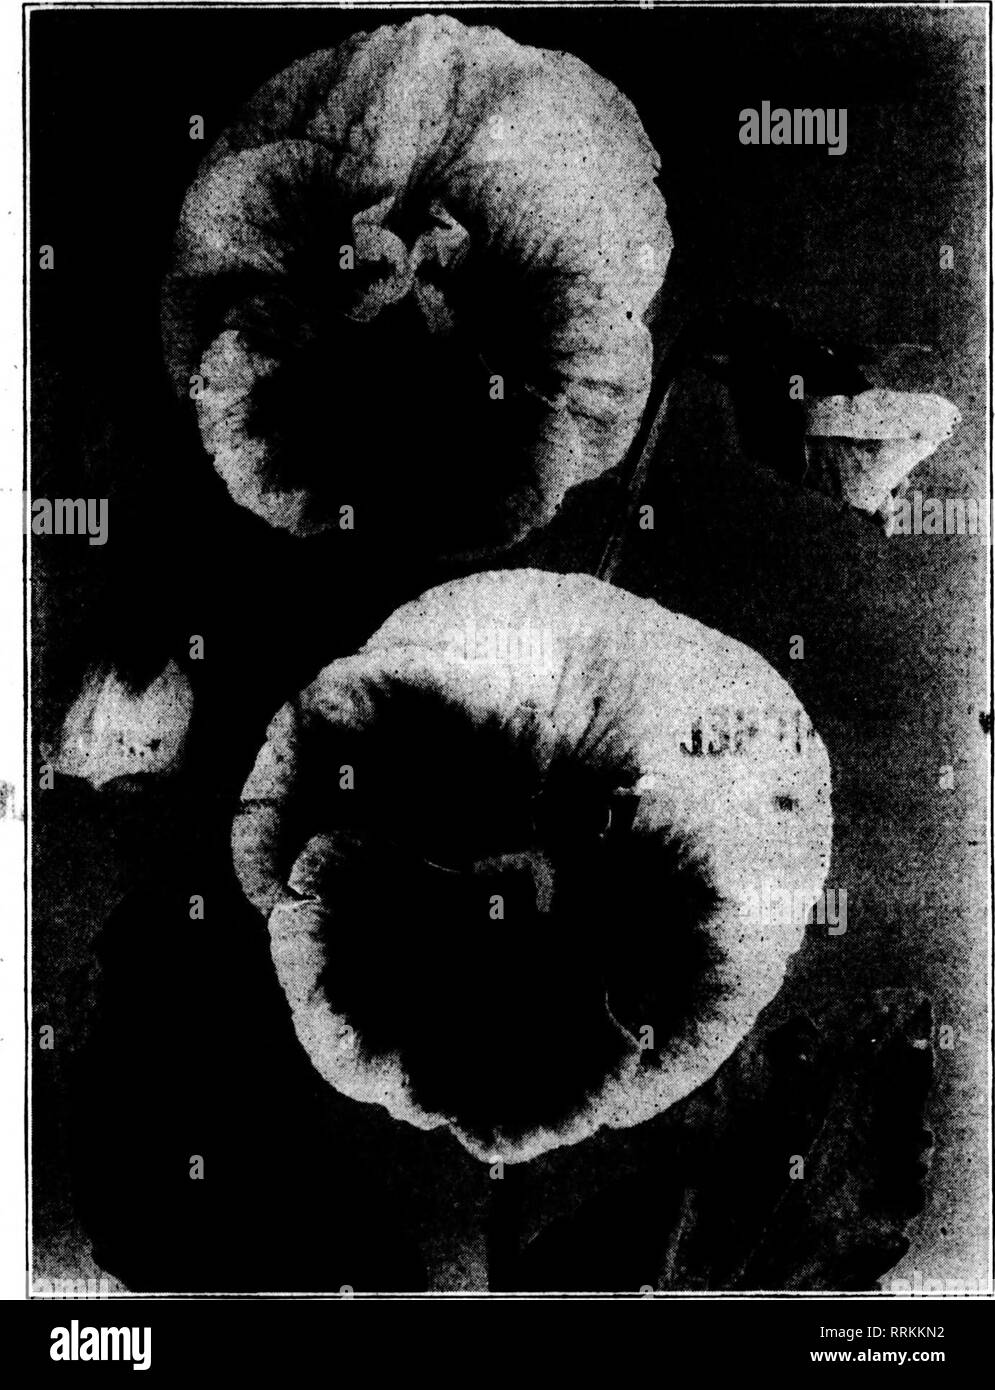 . Florists' review [microform]. Floriculture. r^-piT'- ?'' June 28, 1917. The Florists' Review 57. Pansies for Profit Tliere Is an enormous demand for pansy plants, as you know. Good pansies bring a profitable price and it is profit you are in business for. To firrow good pansies you must first liave good seed; seed from a carefully selected Strain such as you can buy of Toole &amp; Sou. Then of course you must grow them carefully. .. ^ Our part Is to furnish a carefully selected strain of pansy seed, strong in germination, which we do. Your part is to grow them carefully, and fully as importa Stock Photo